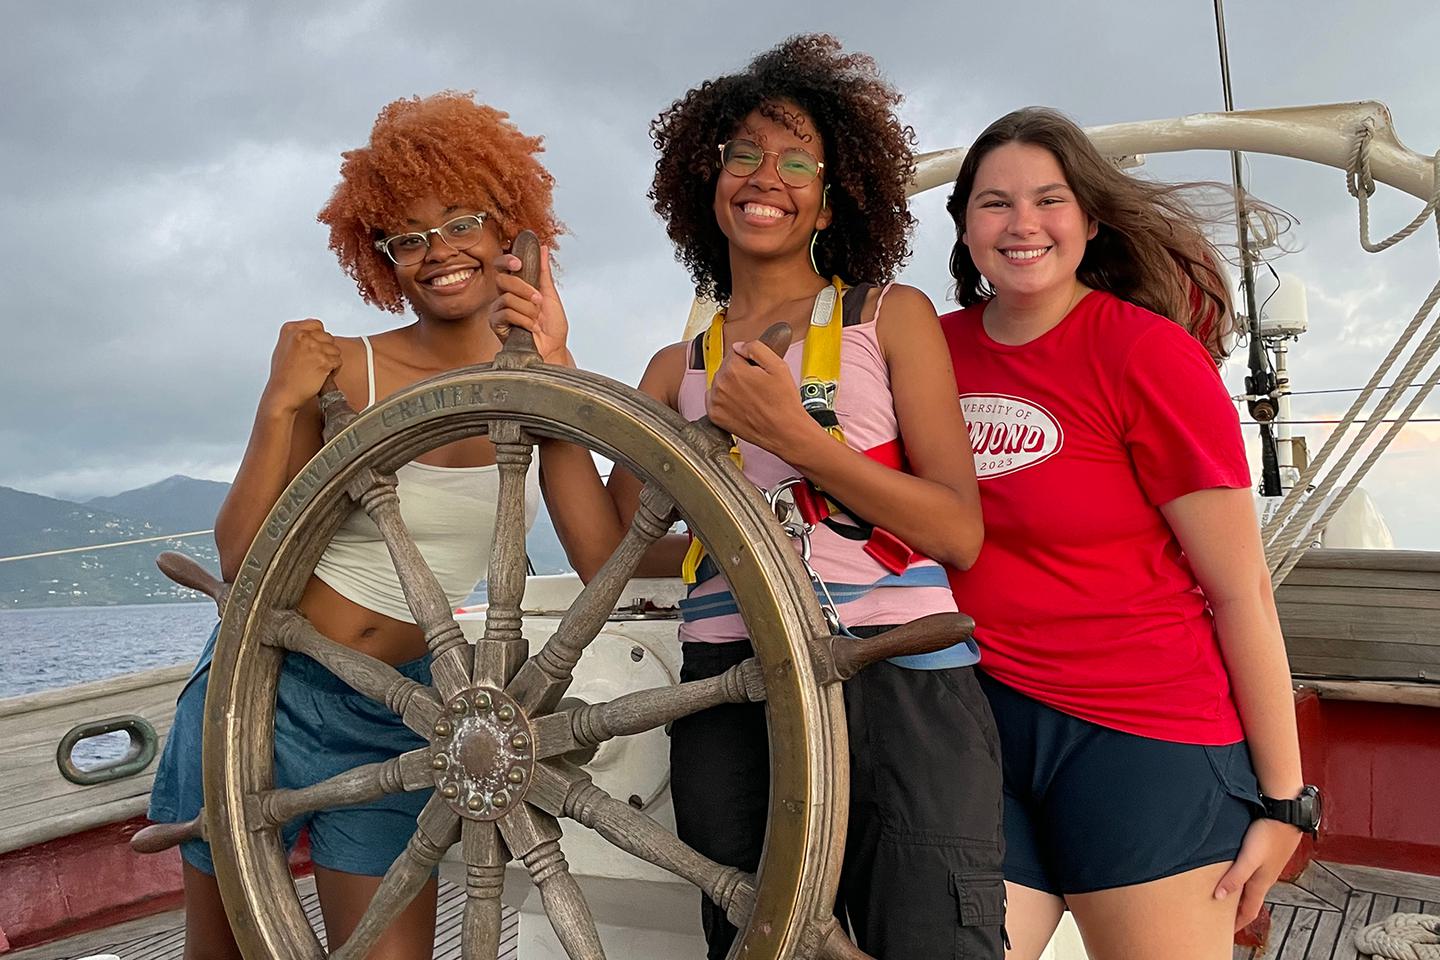 Amadi Mitchell ’23, Kyaralind Vasquez-Liriano ’23 and Macy Littell ’23 stand at the helm of the tall ship they worked on.